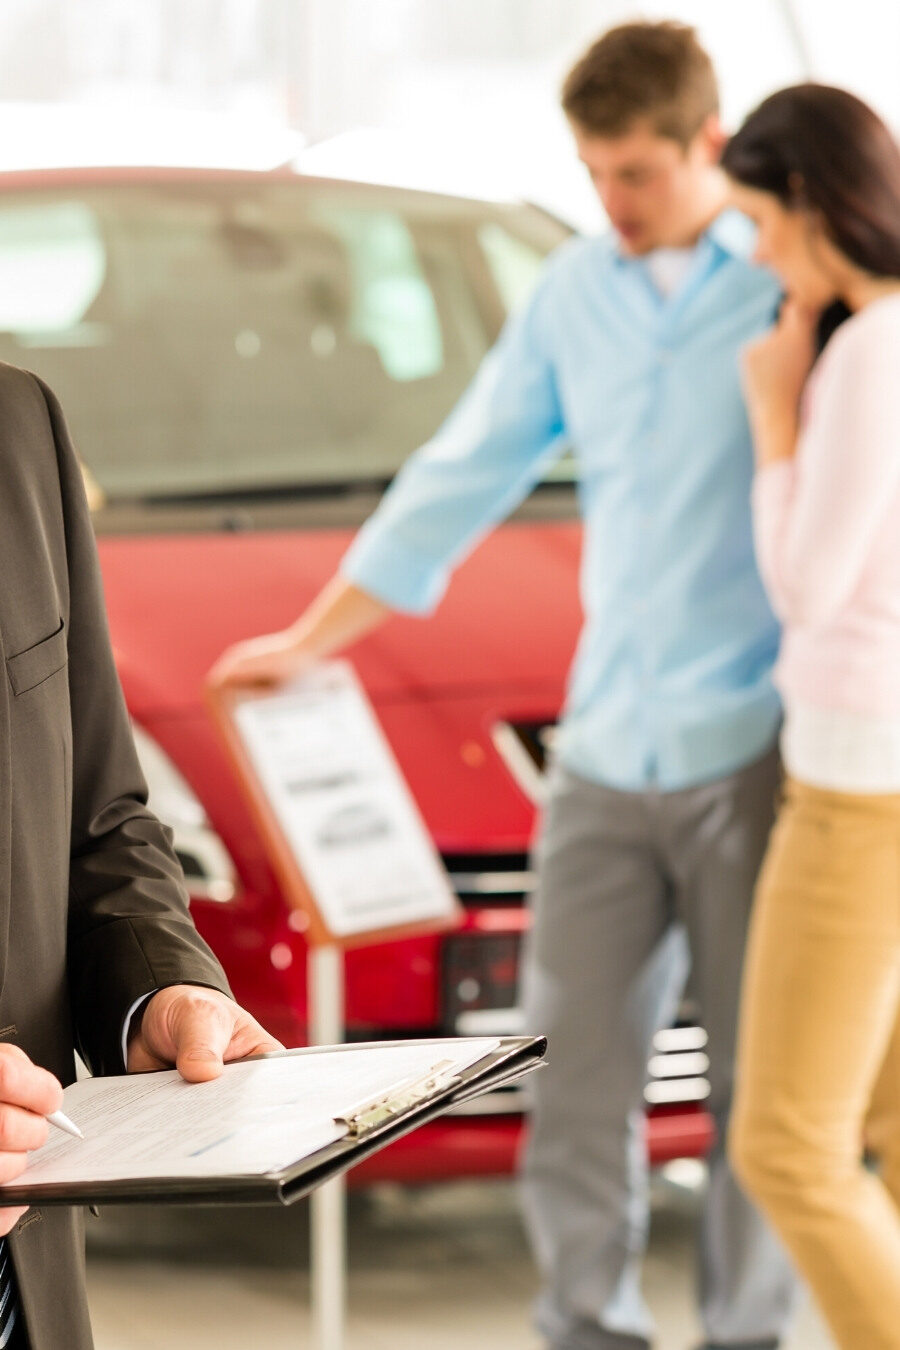 6 Important Features to Look For When Buying a Family Car